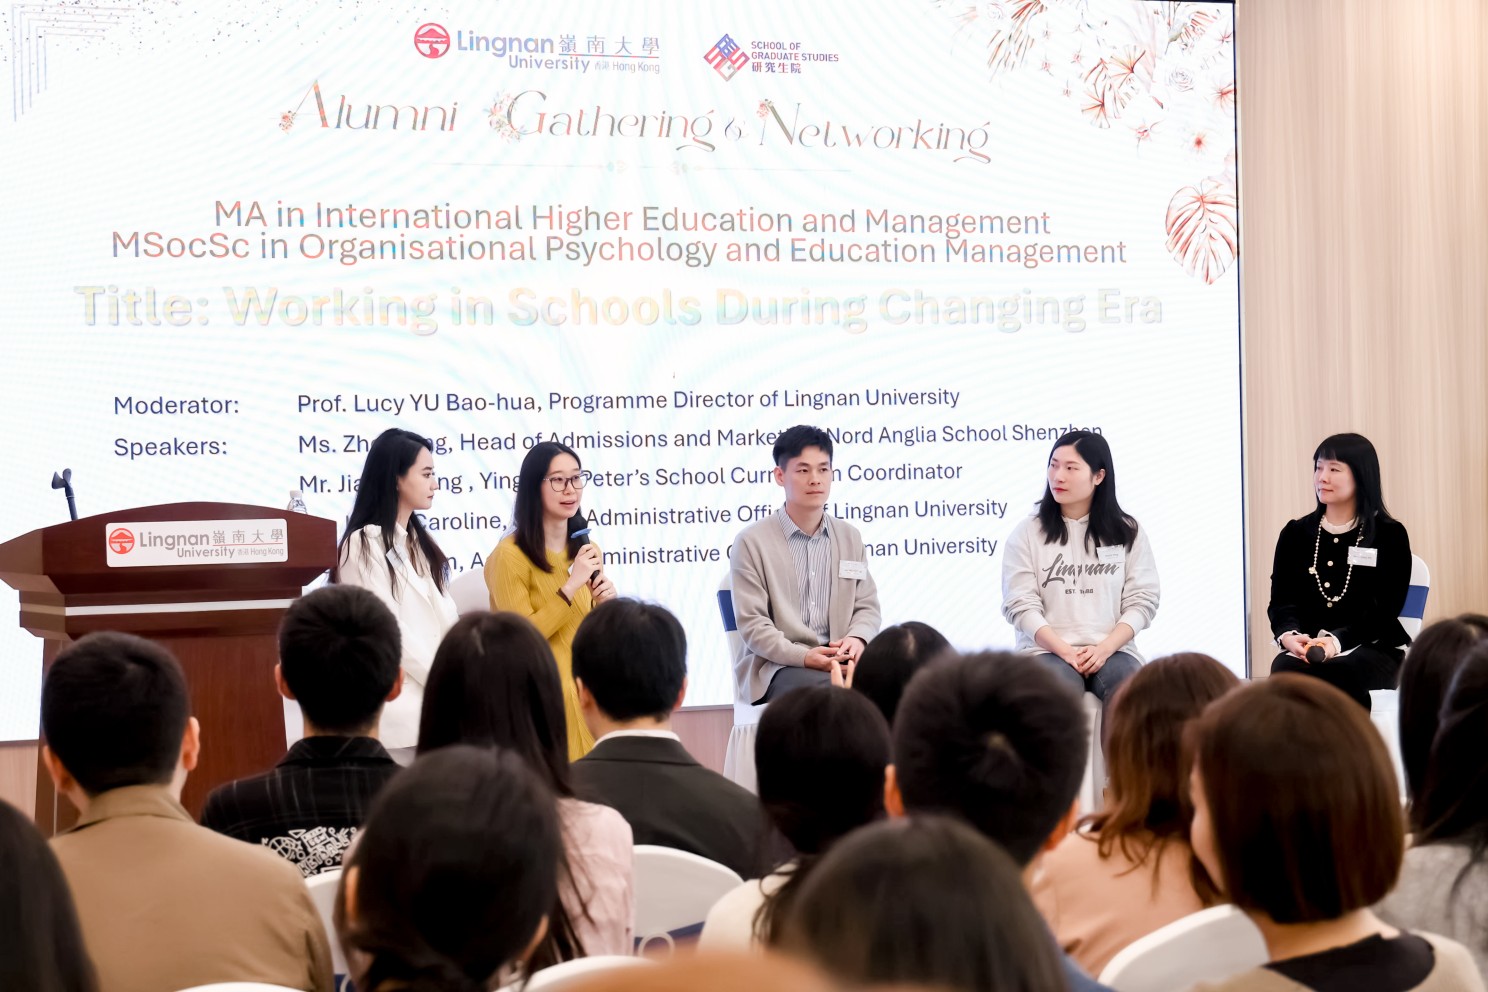 Prof Lucy Yu (right) moderated the “Working in Schools During a Changing Era” sharing session.